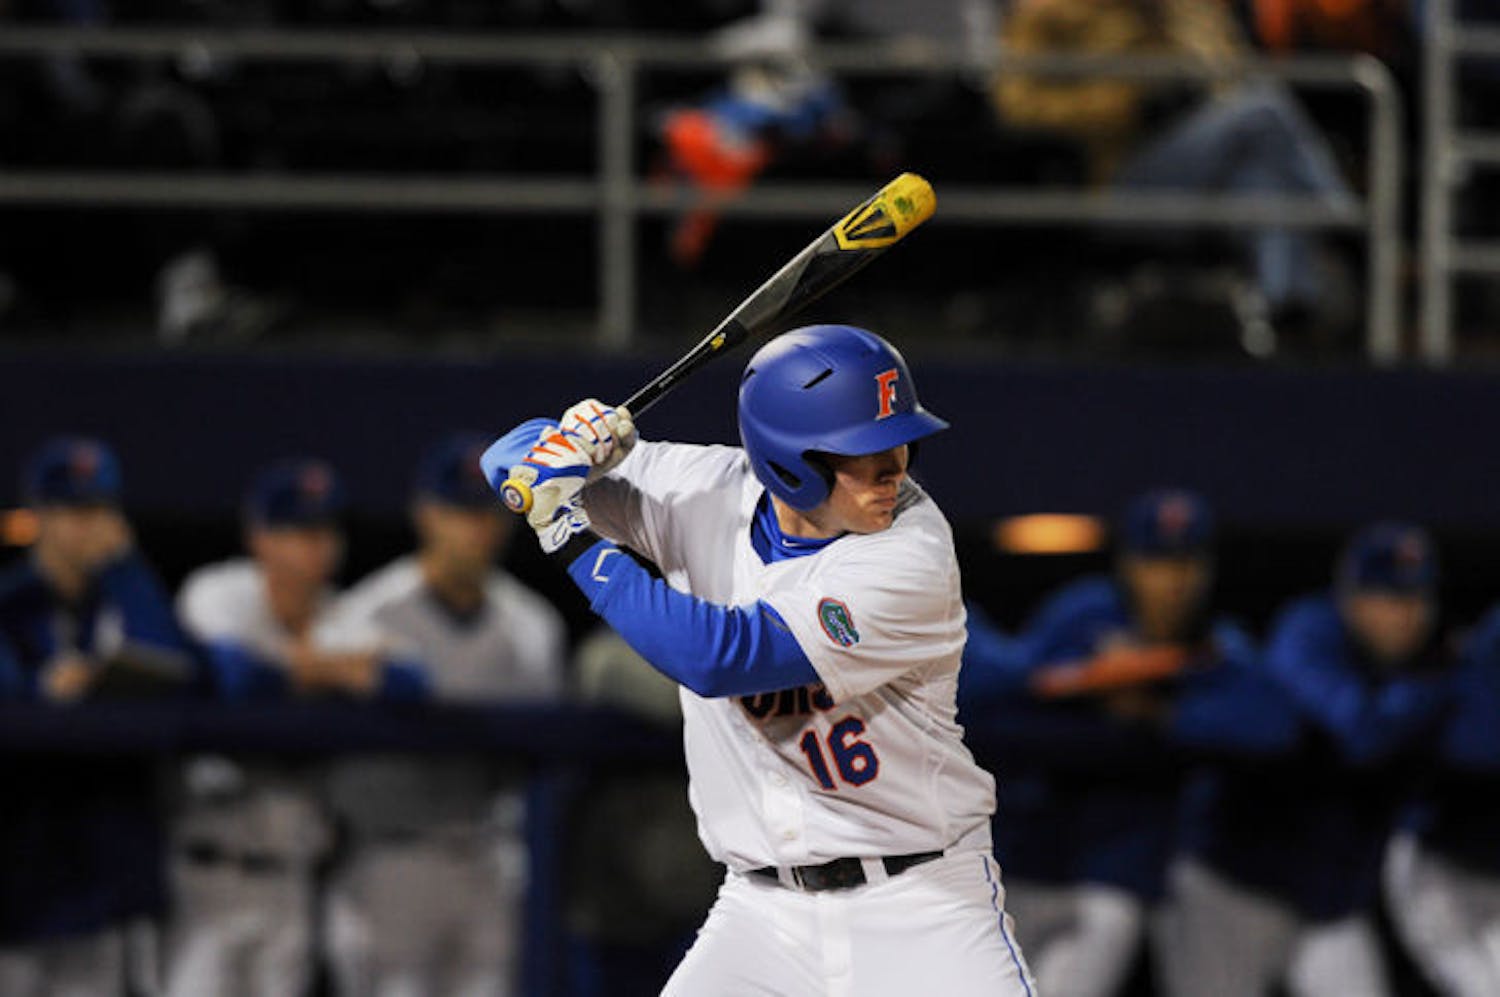 Justin Shafer bats during Florida’s 4-0 win against Maryland on Feb. 14 at McKethan Stadium.